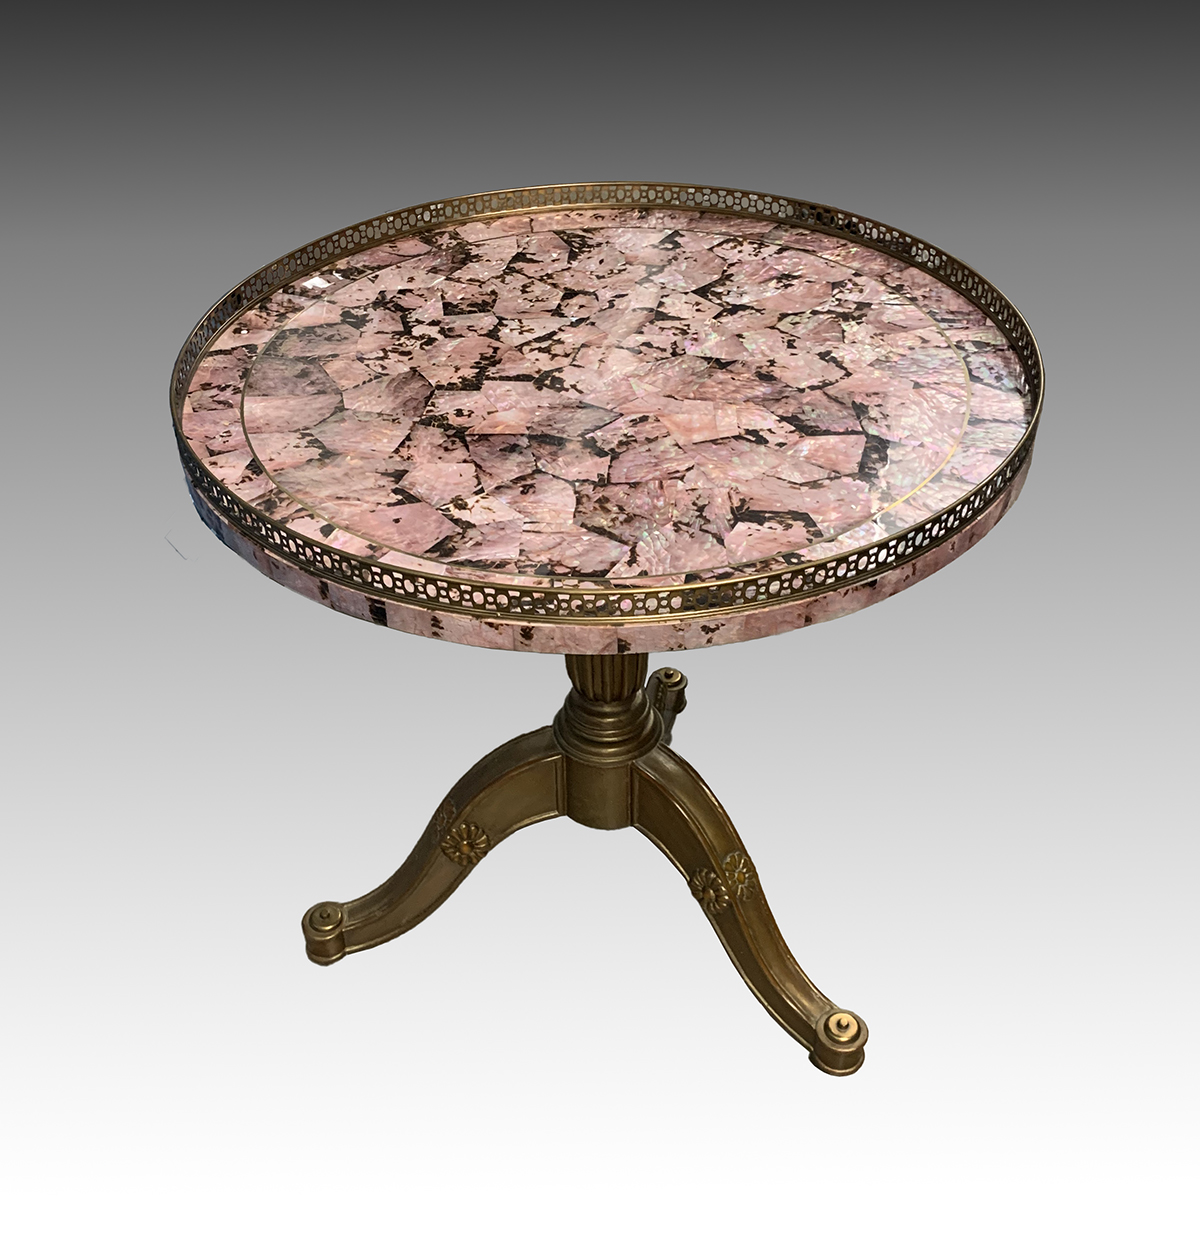 MOTHER OF PEARL GALLERY TOP TABLE: